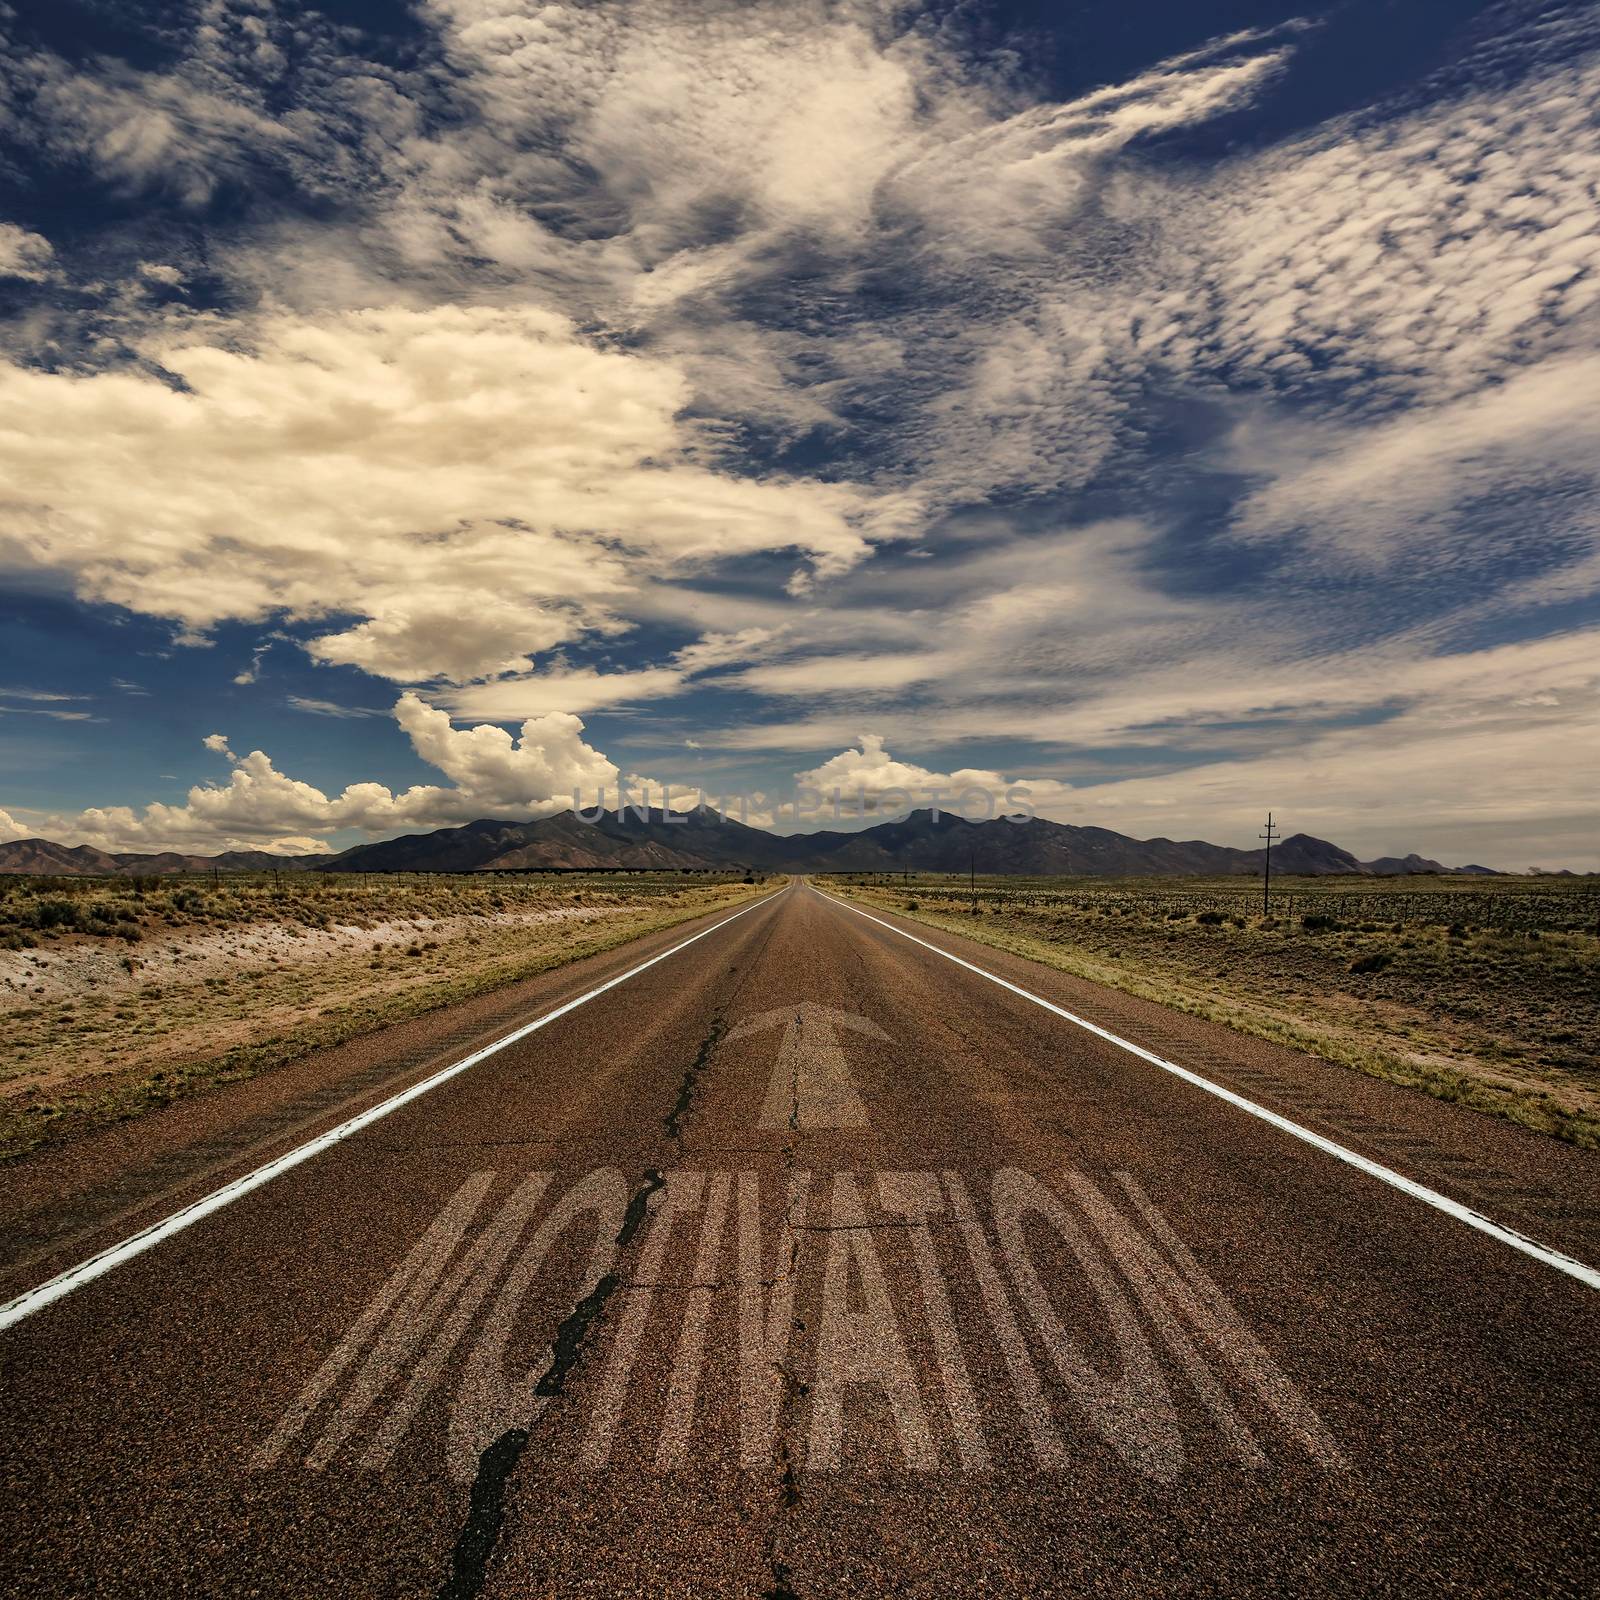 Conceptual image of desert road with the word motivation and arrow